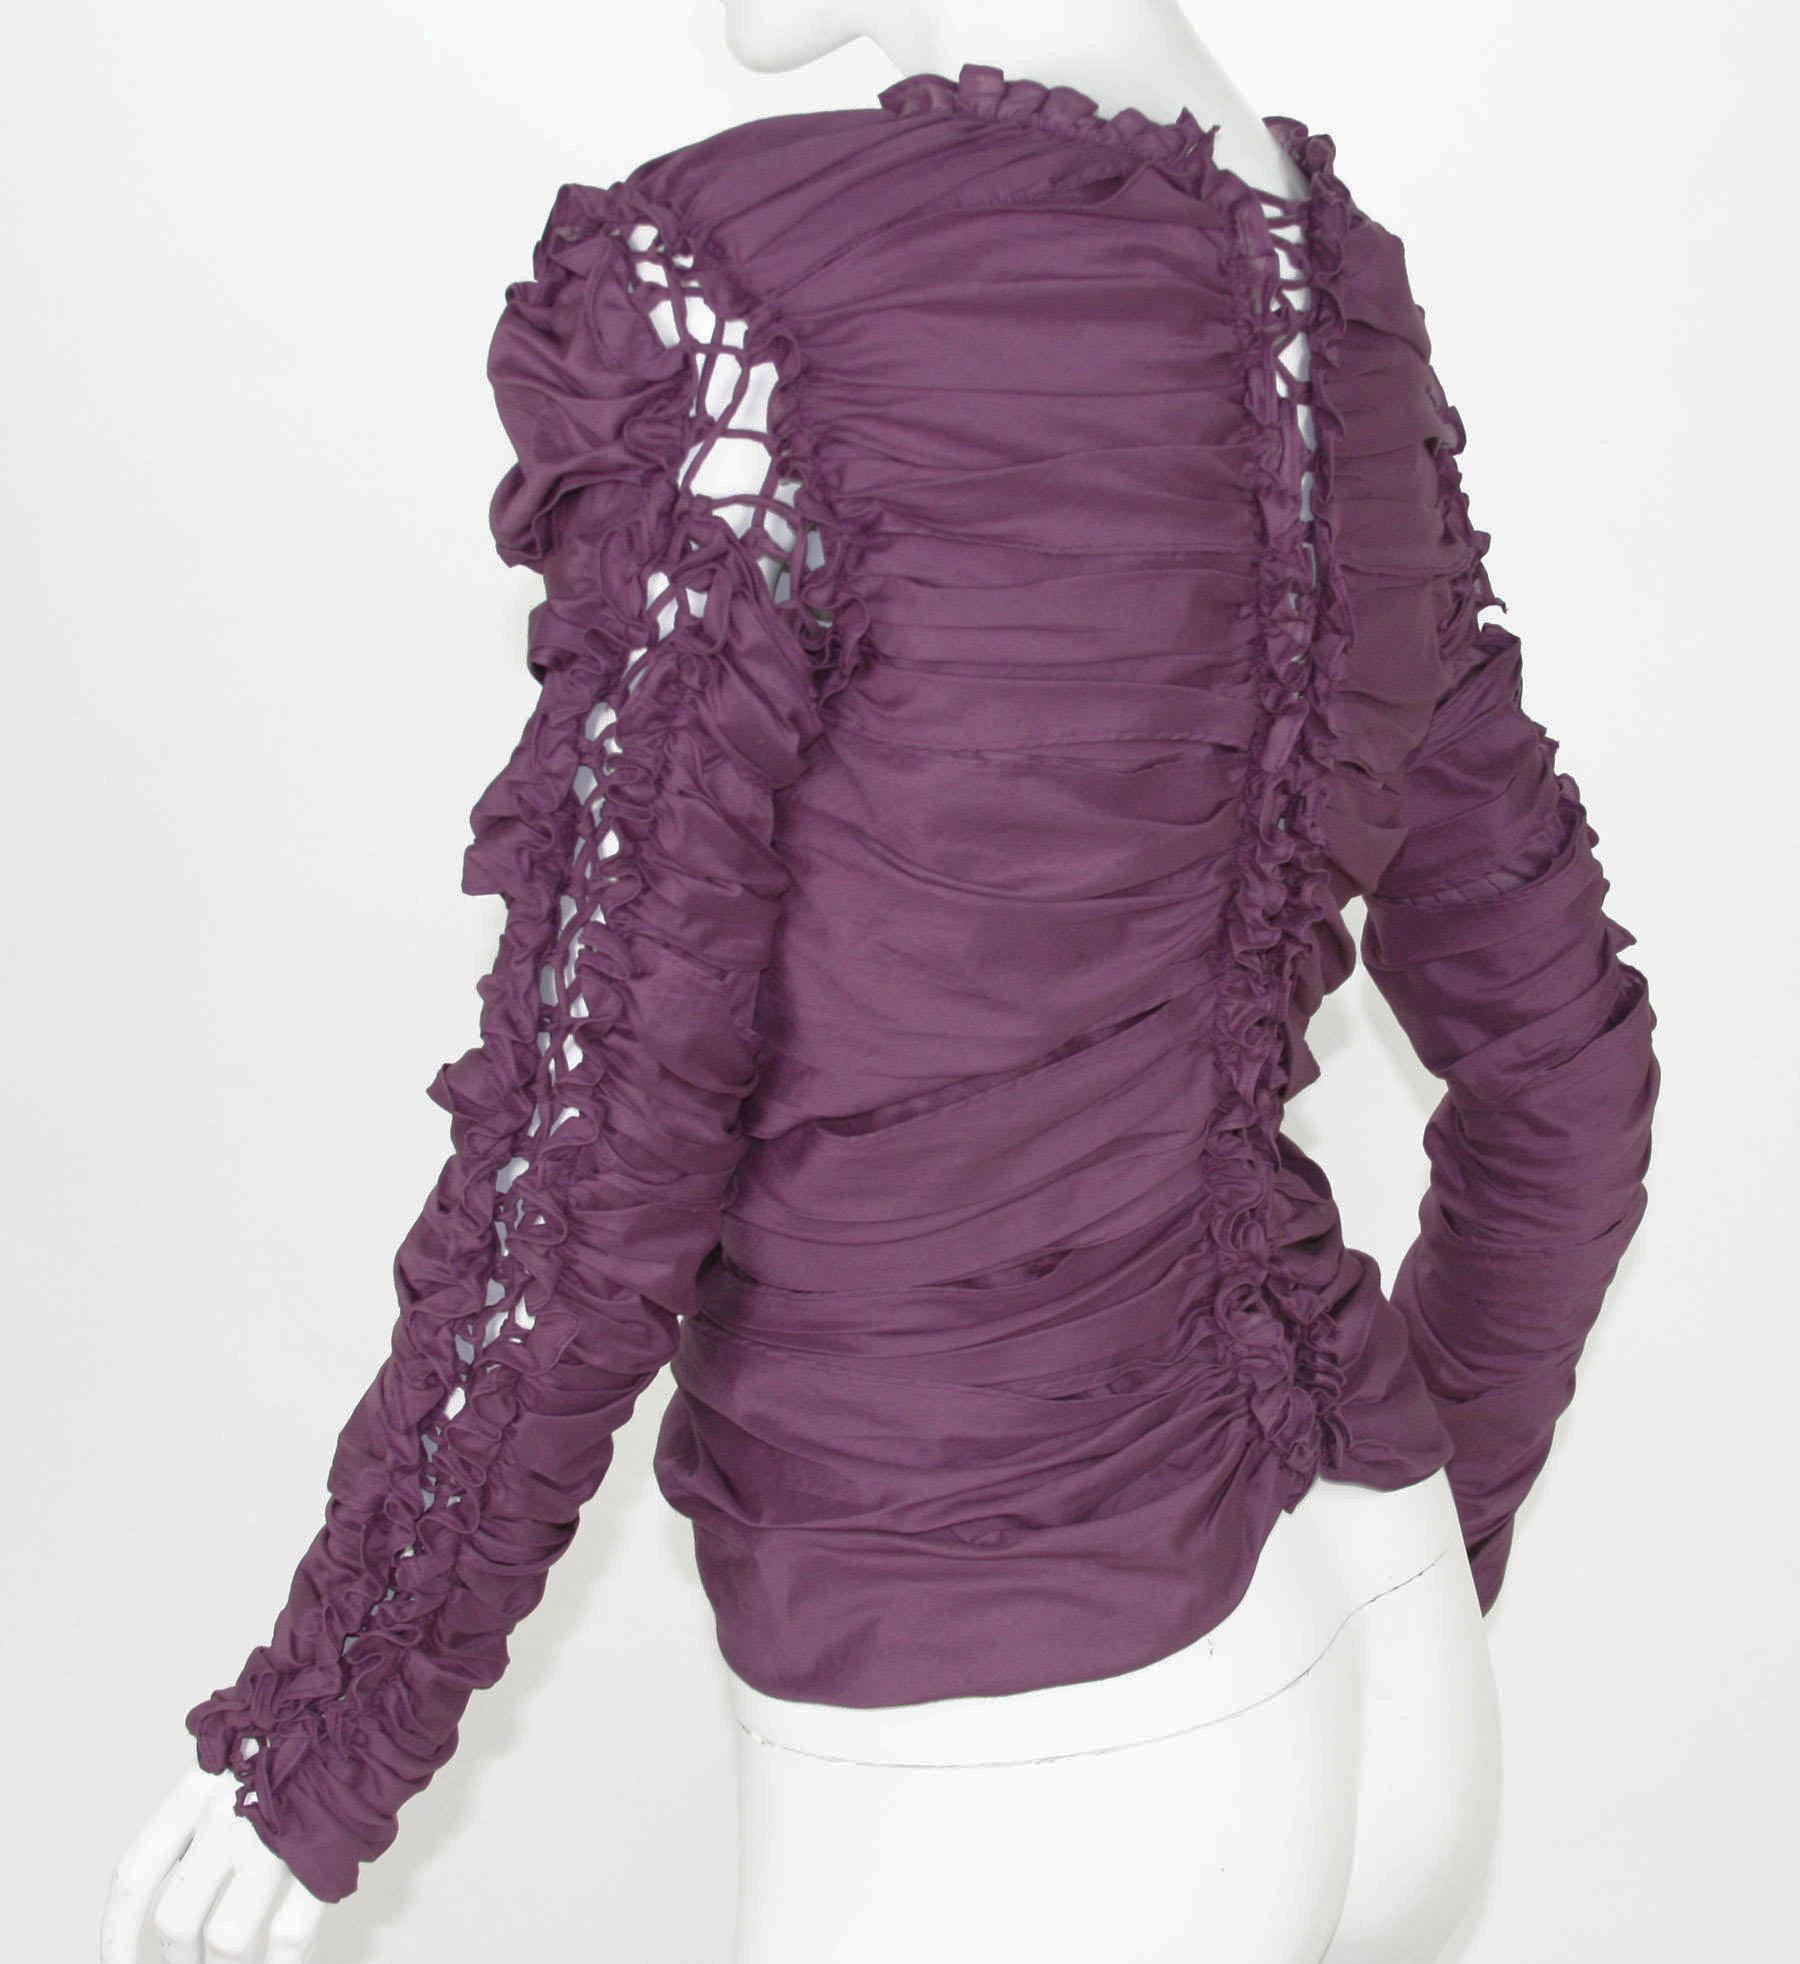 Women's TOM FORD for YVES SAINT LAURENT F/W 2001 Plum Lace-Up Top Blouse Fr 40 - US 6/8